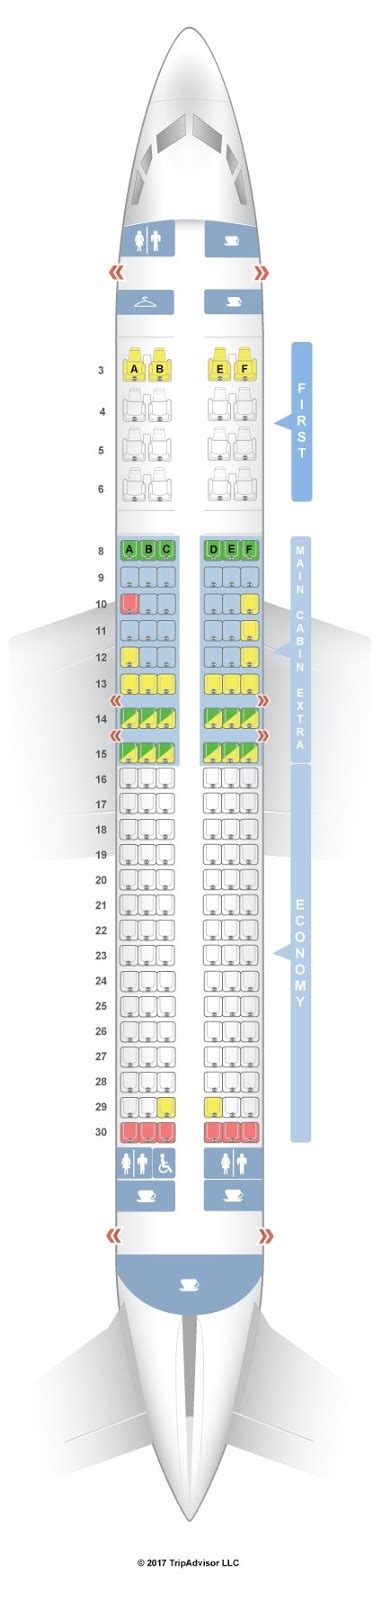 Recline 3". . American airlines seat map